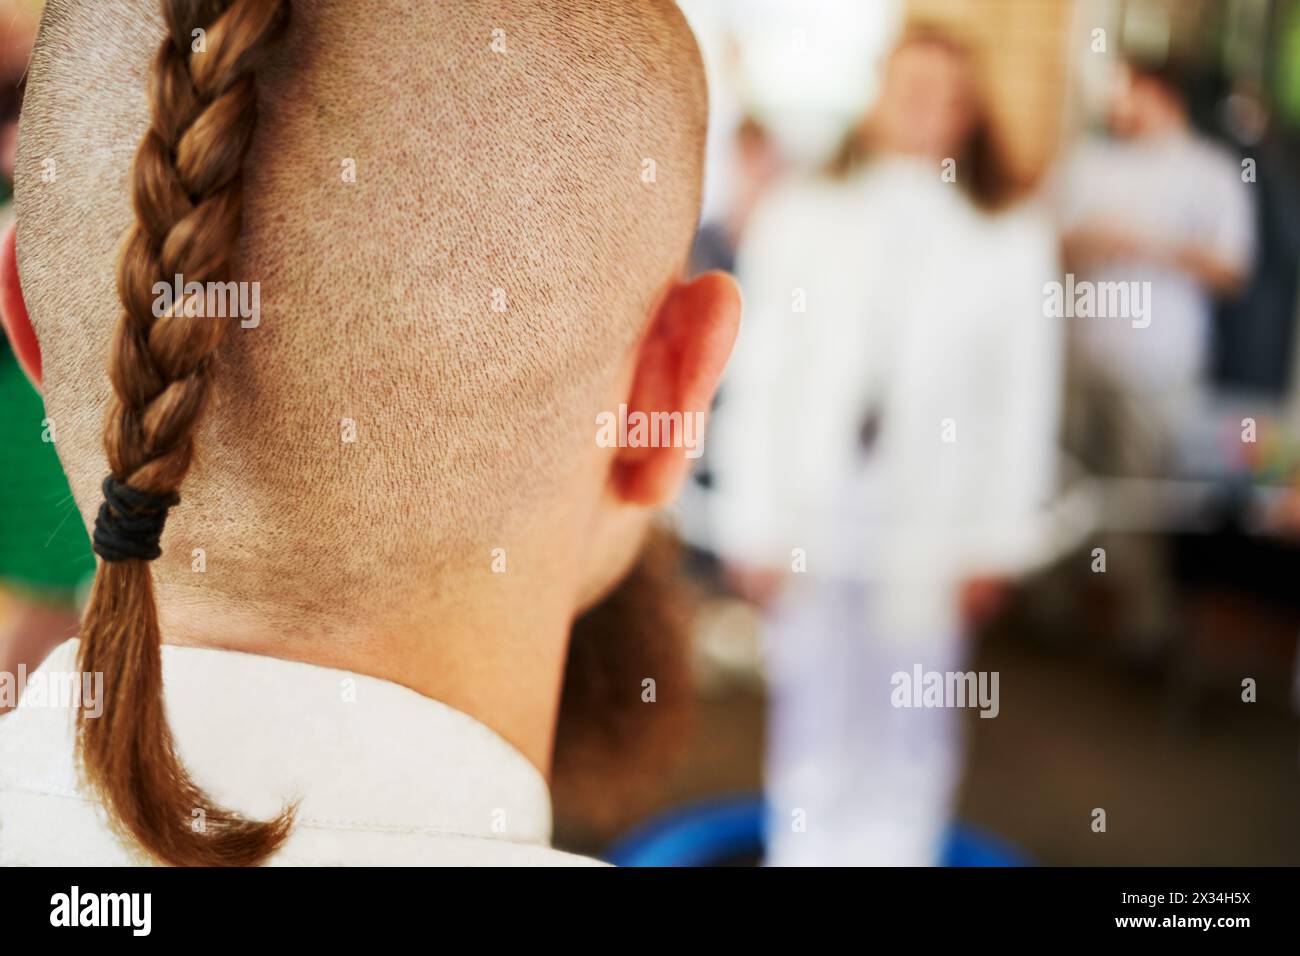 Back of the head of young man with shaved head and braided plait. Stock Photo